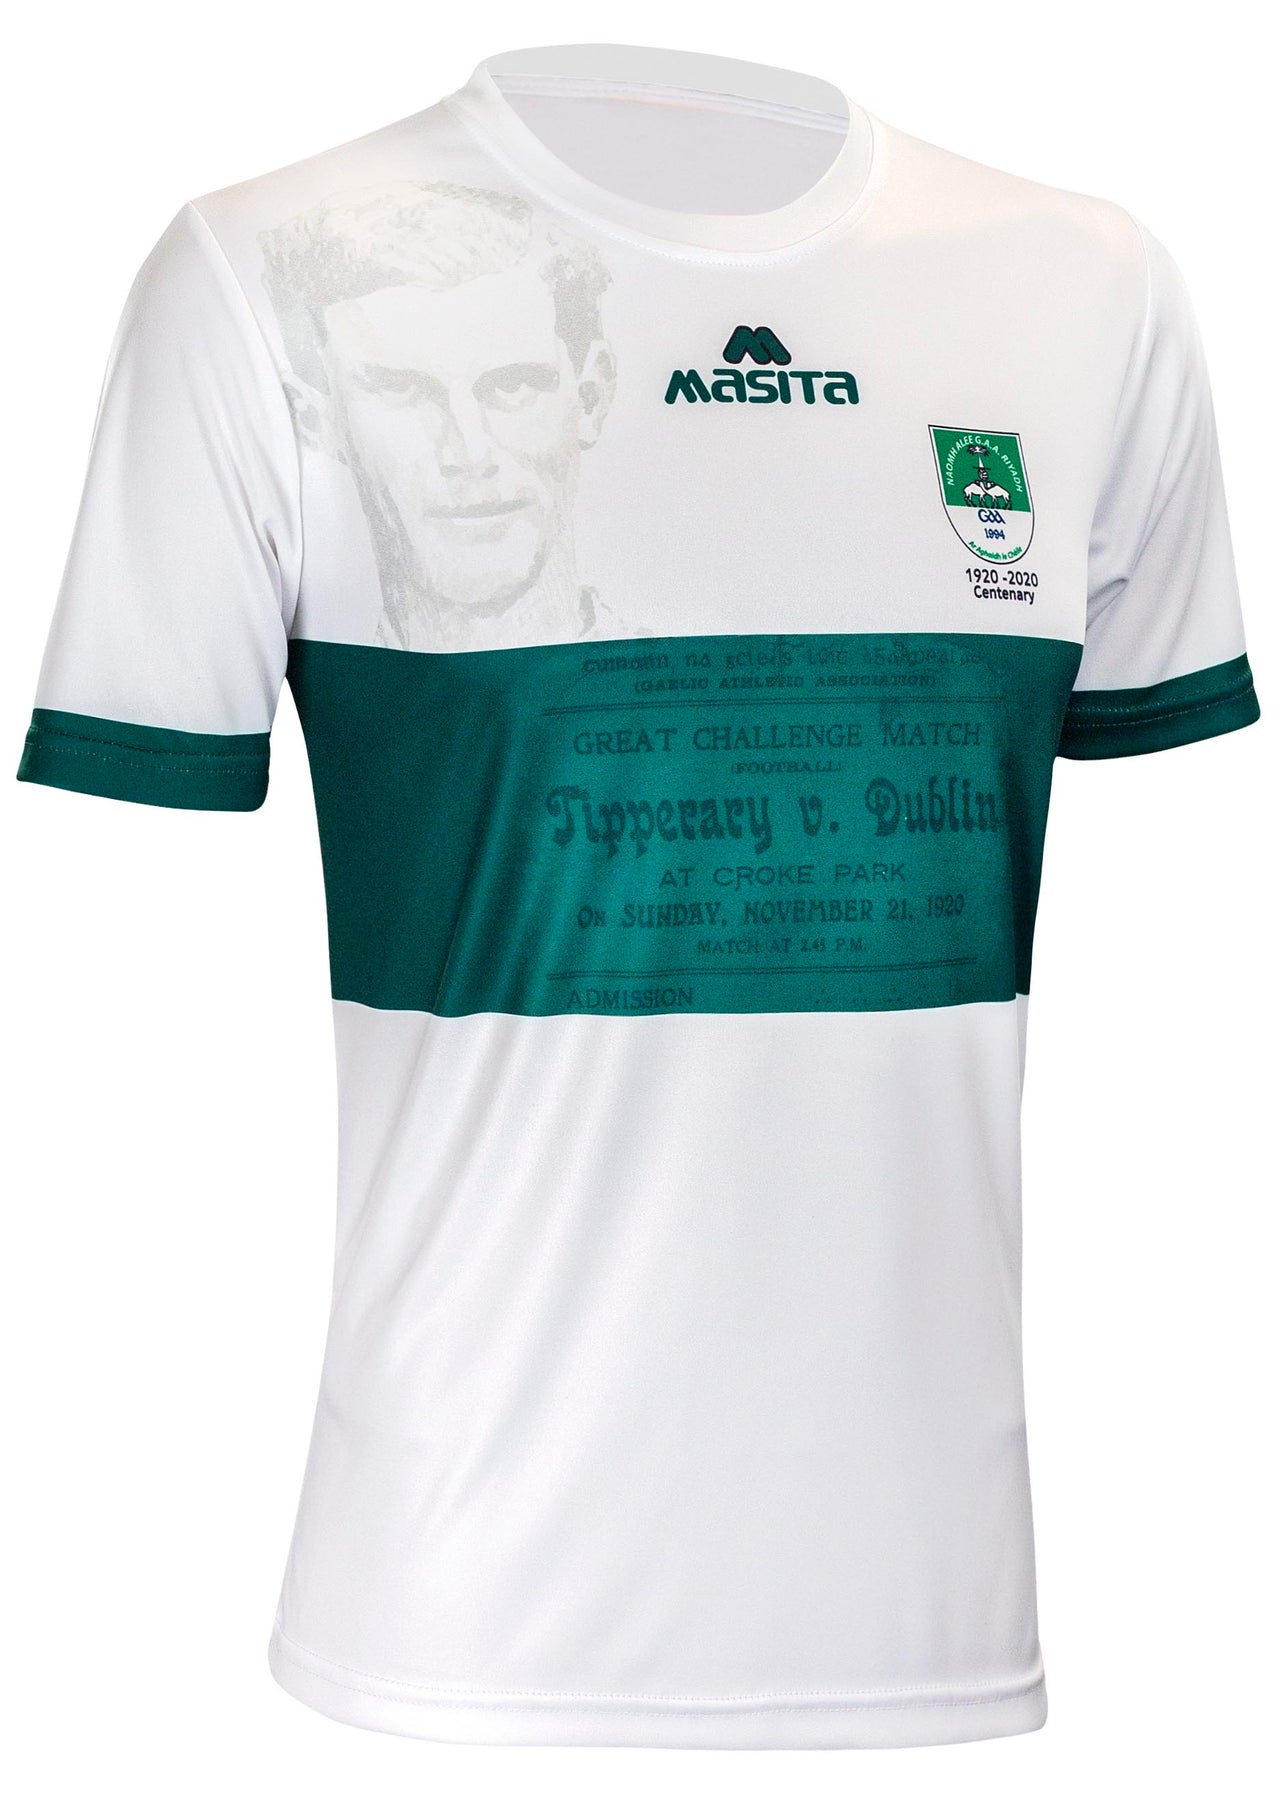 Naomh Alee Riyadh White Commemorative Jersey Player Fit Adult